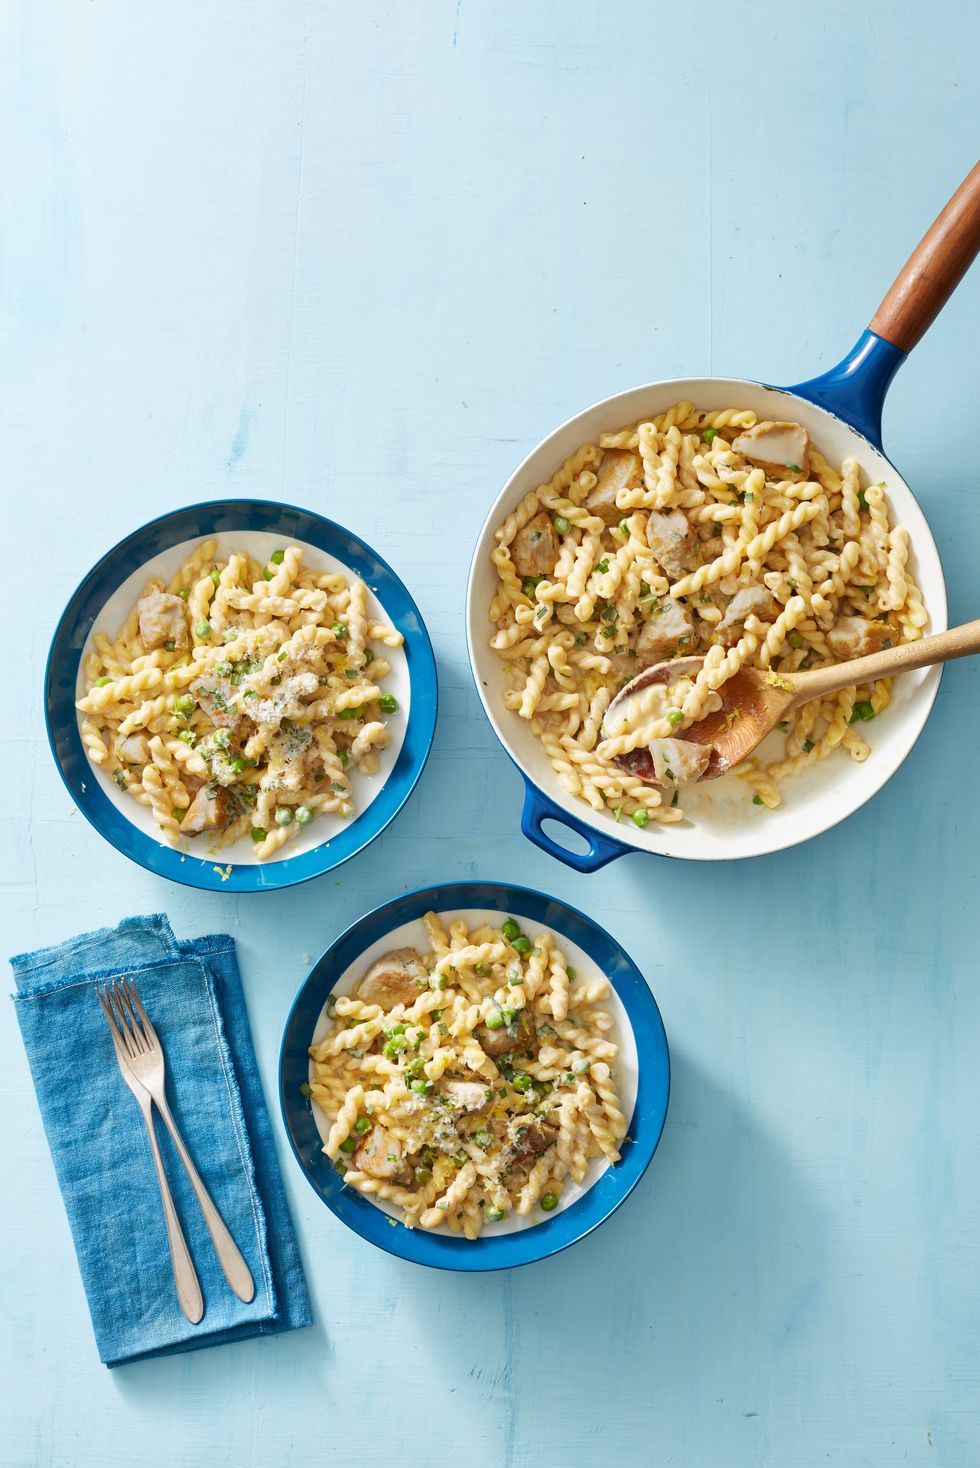 https://hips.hearstapps.com/hmg-prod/images/creamy-lemon-pasta-with-chicken-and-peas-1602858320.jpg?crop=0.896xw:0.895xh;0.0426xw,0.0398xh&resize=980:*